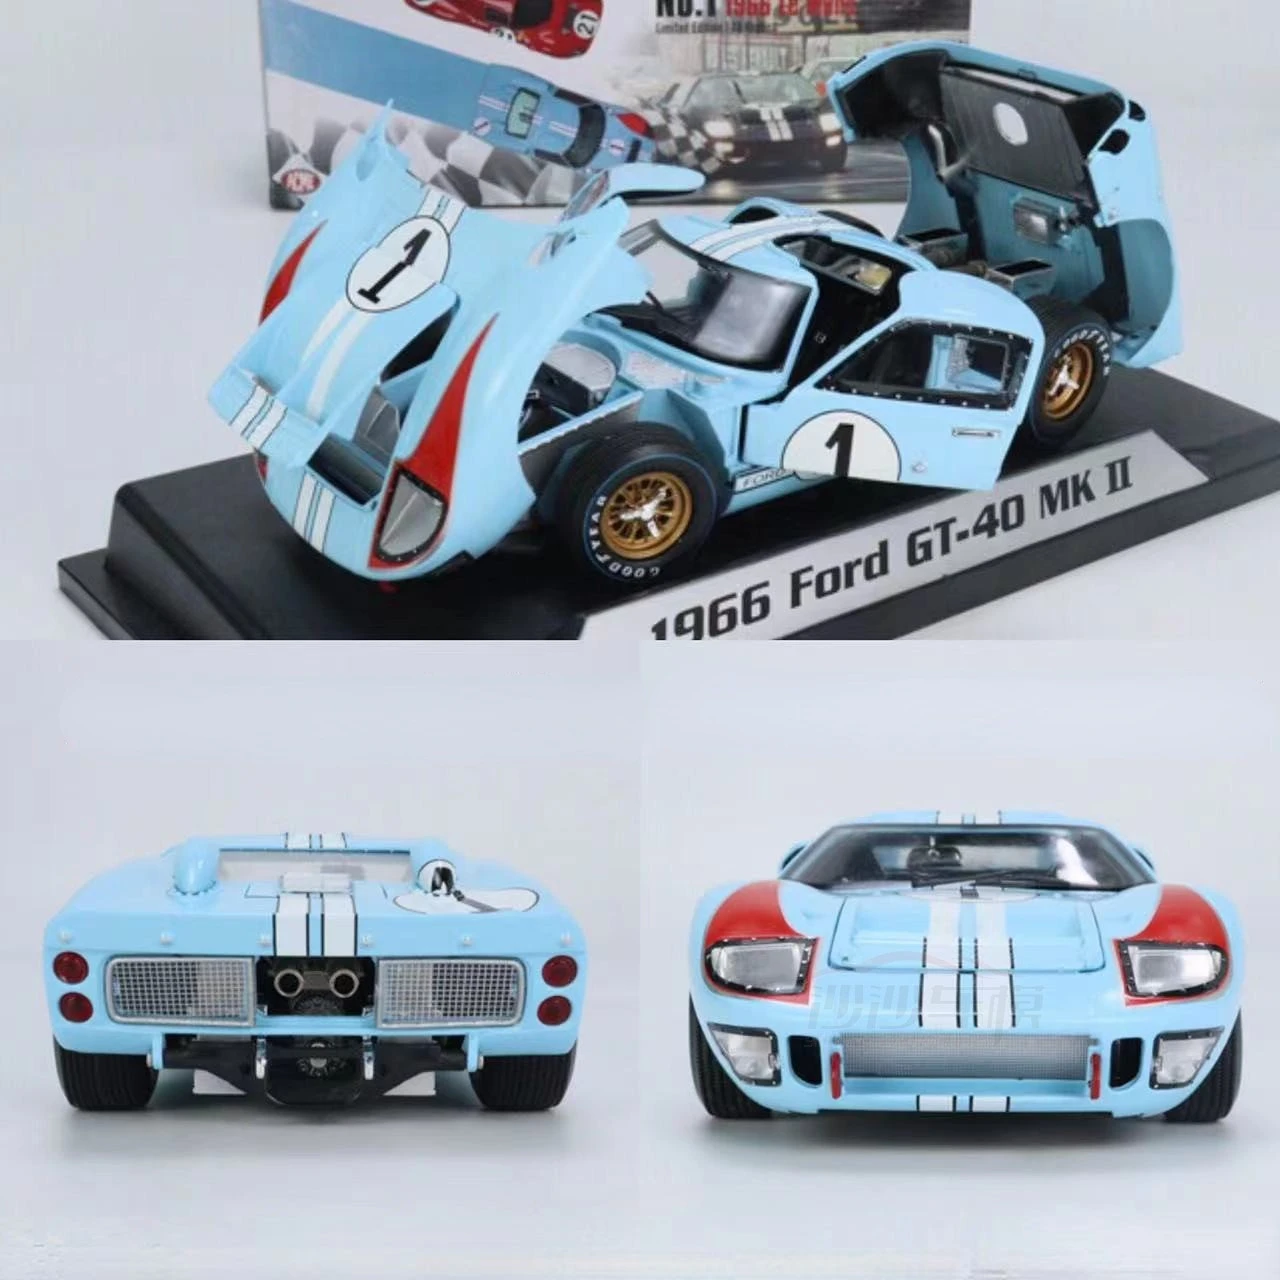 

ACME 1:18 Ford GT40 MK II 1966 Le Mans Racing Alloy Fully Open Limited Edition Resin Metal Static Car Model Toy Gift